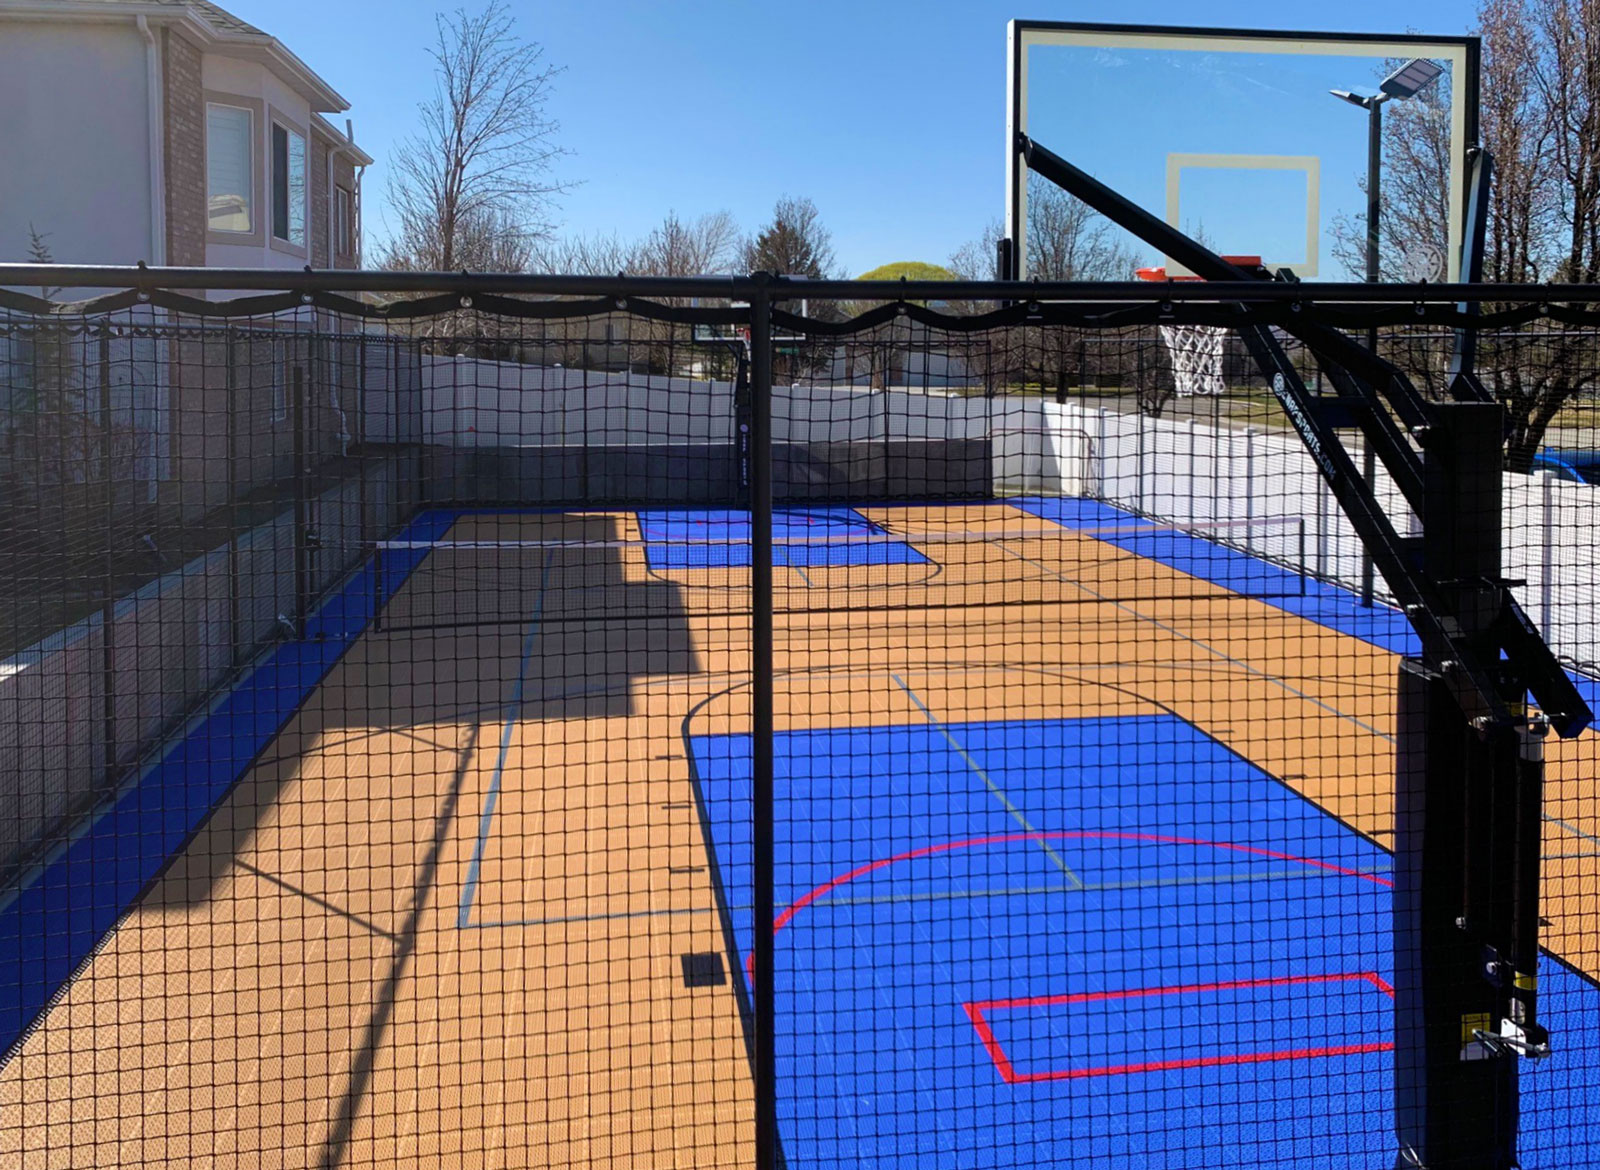 A Bright Blue and Orange backyard multi-court with hoops, nets, and fencing